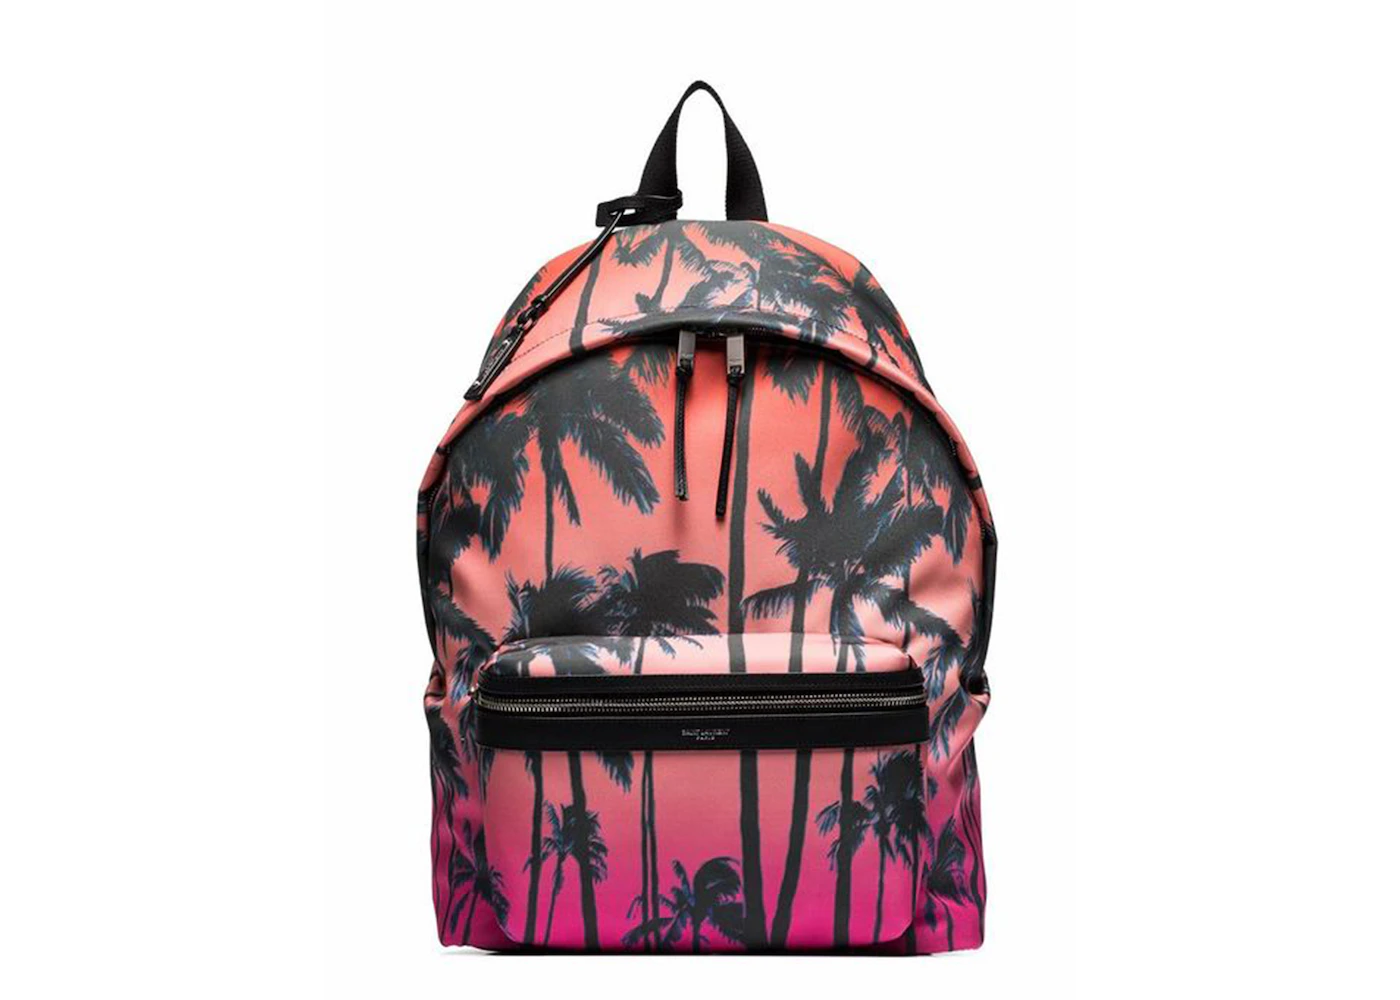 Saint Laurent City Canvas Backpack Palm Print Black/Multi in Nylon with ...